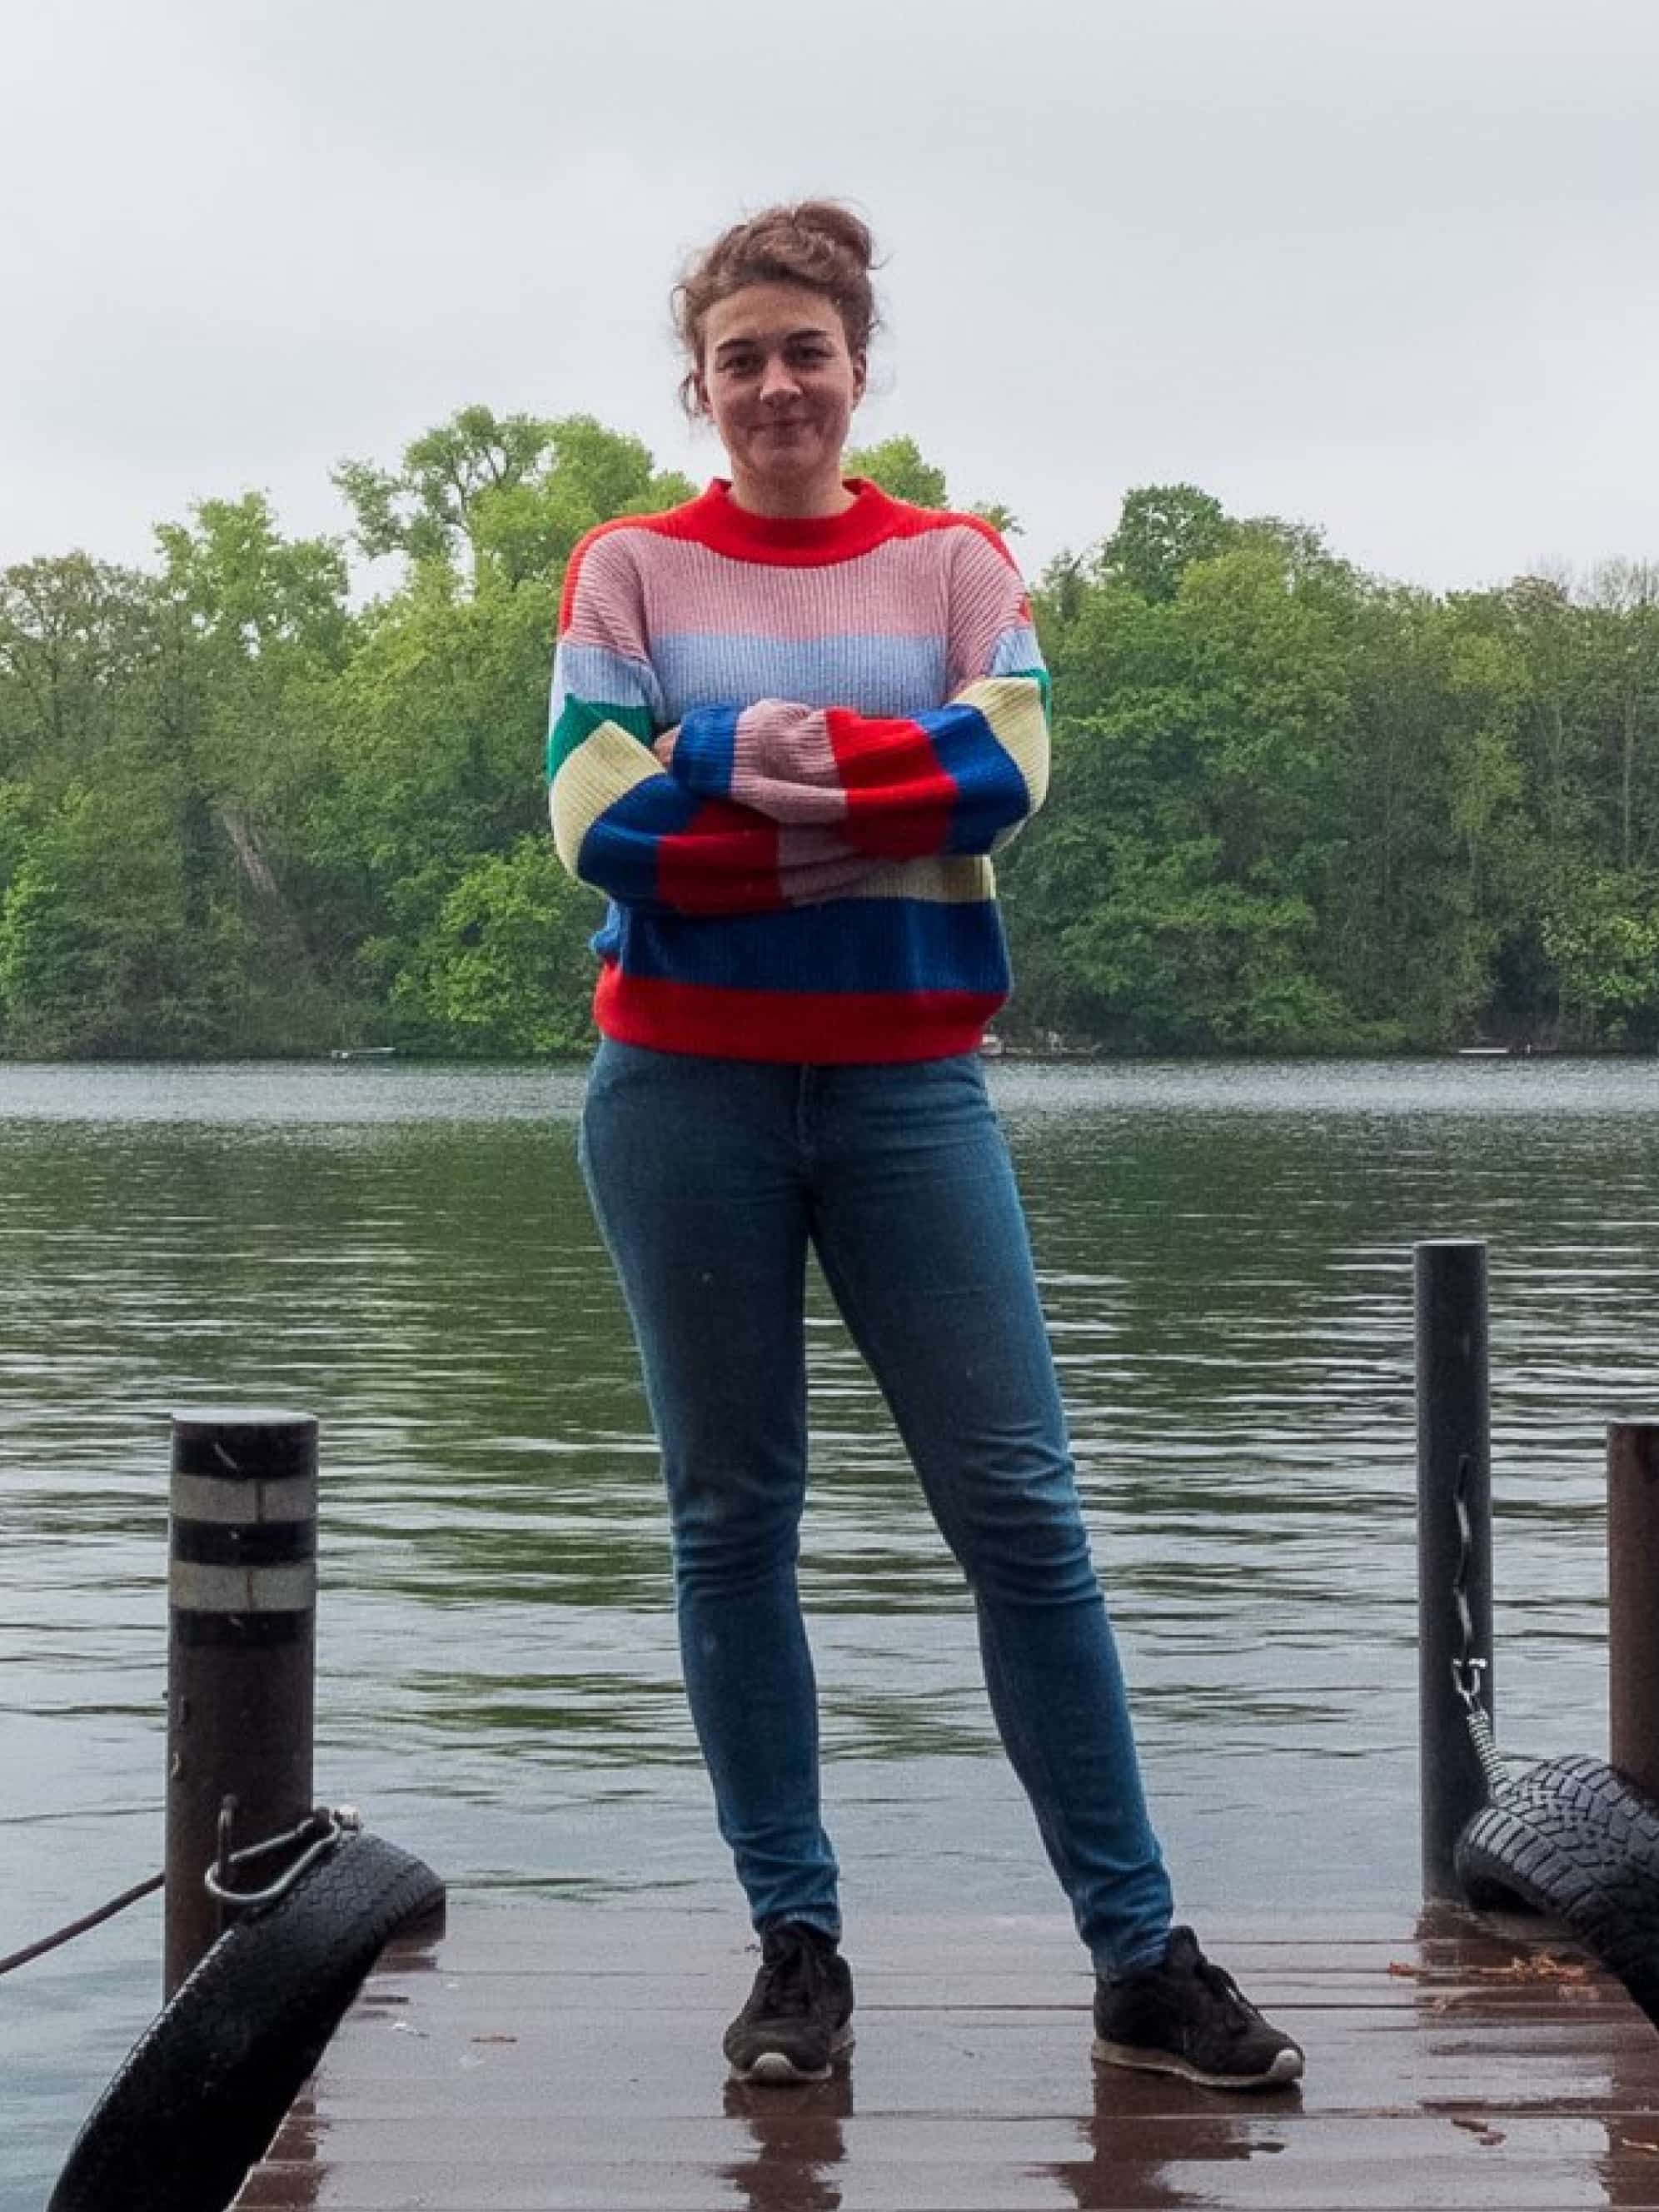 A woman in a colorful knitted sweater stands on a jetty in front of Lake Tegel.